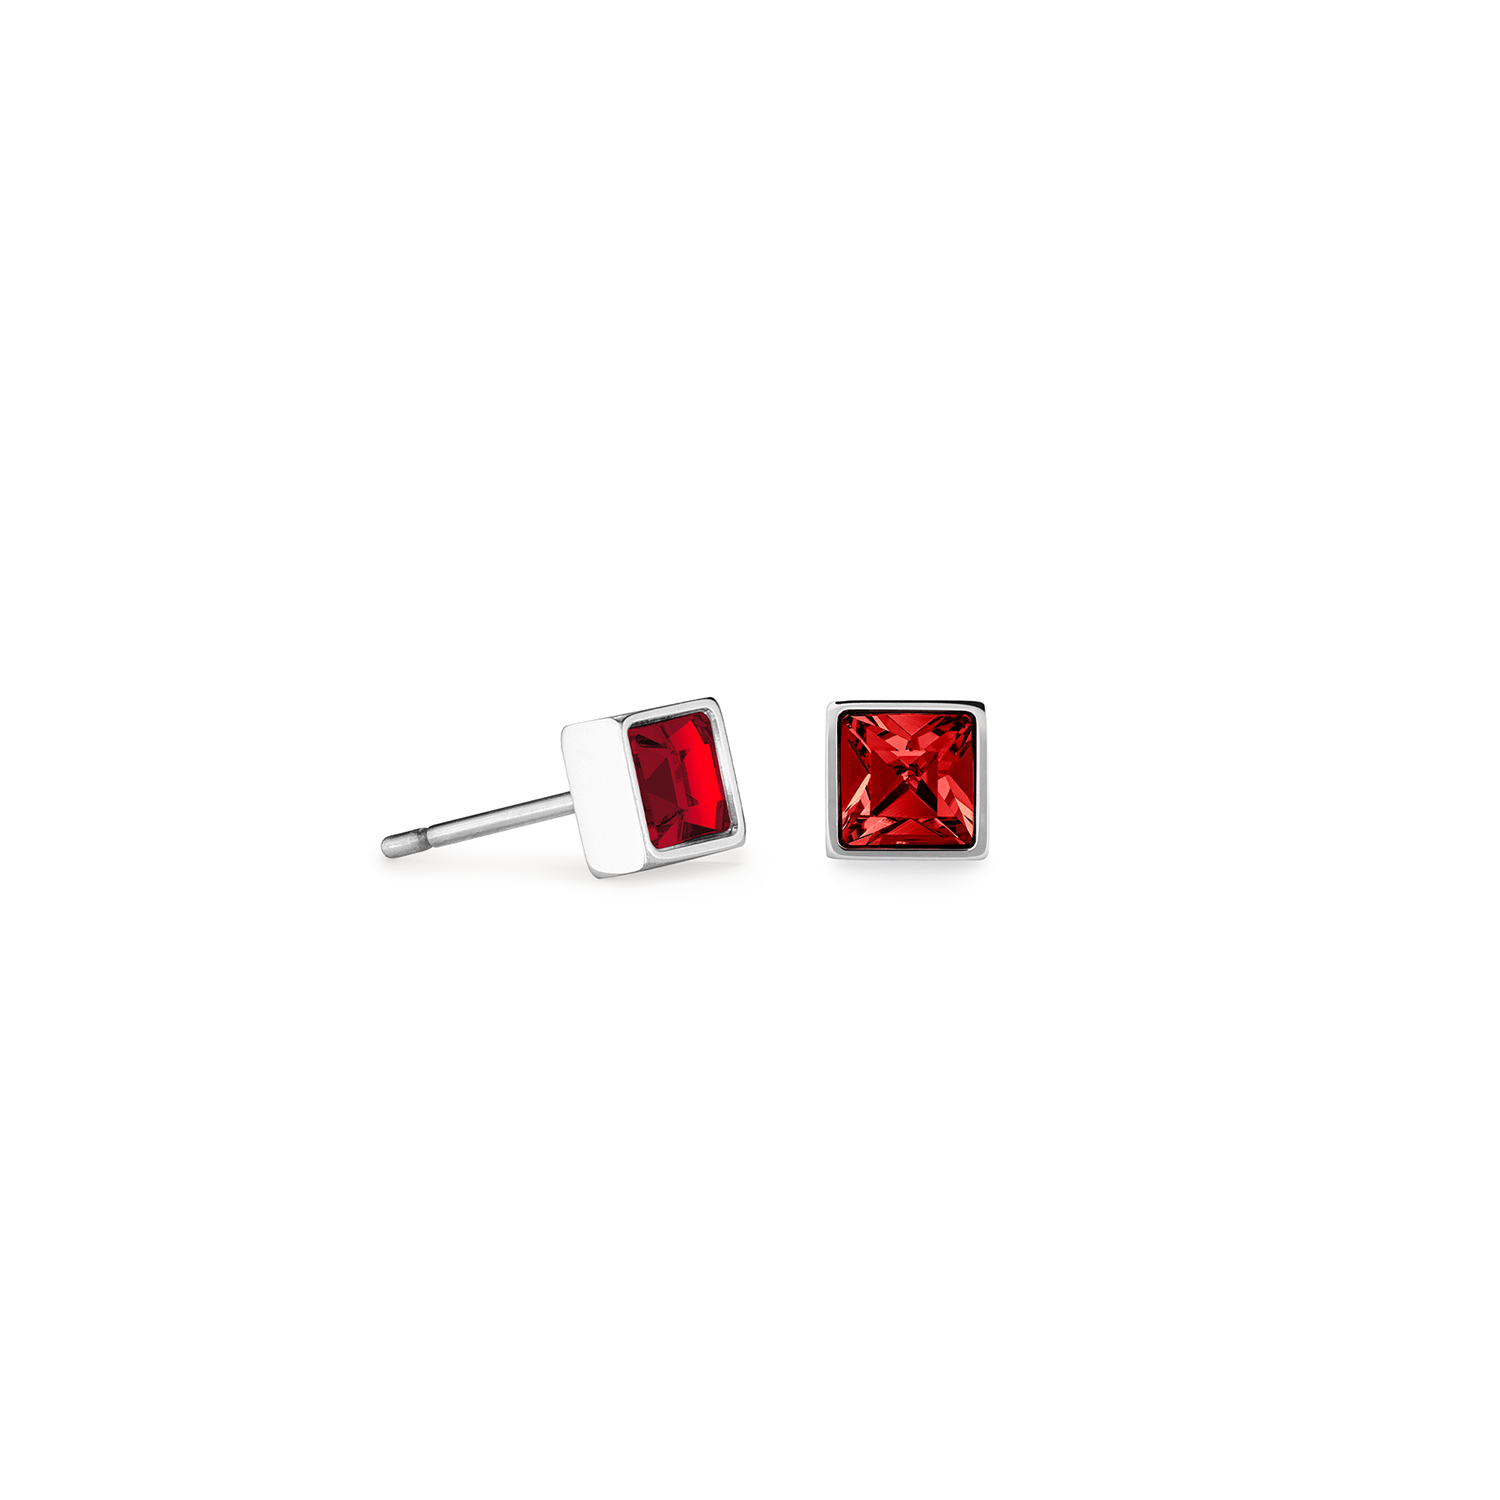 Brilliant Square Small Stud Earrings with Crystals 0501/21_0317 - Royal Red